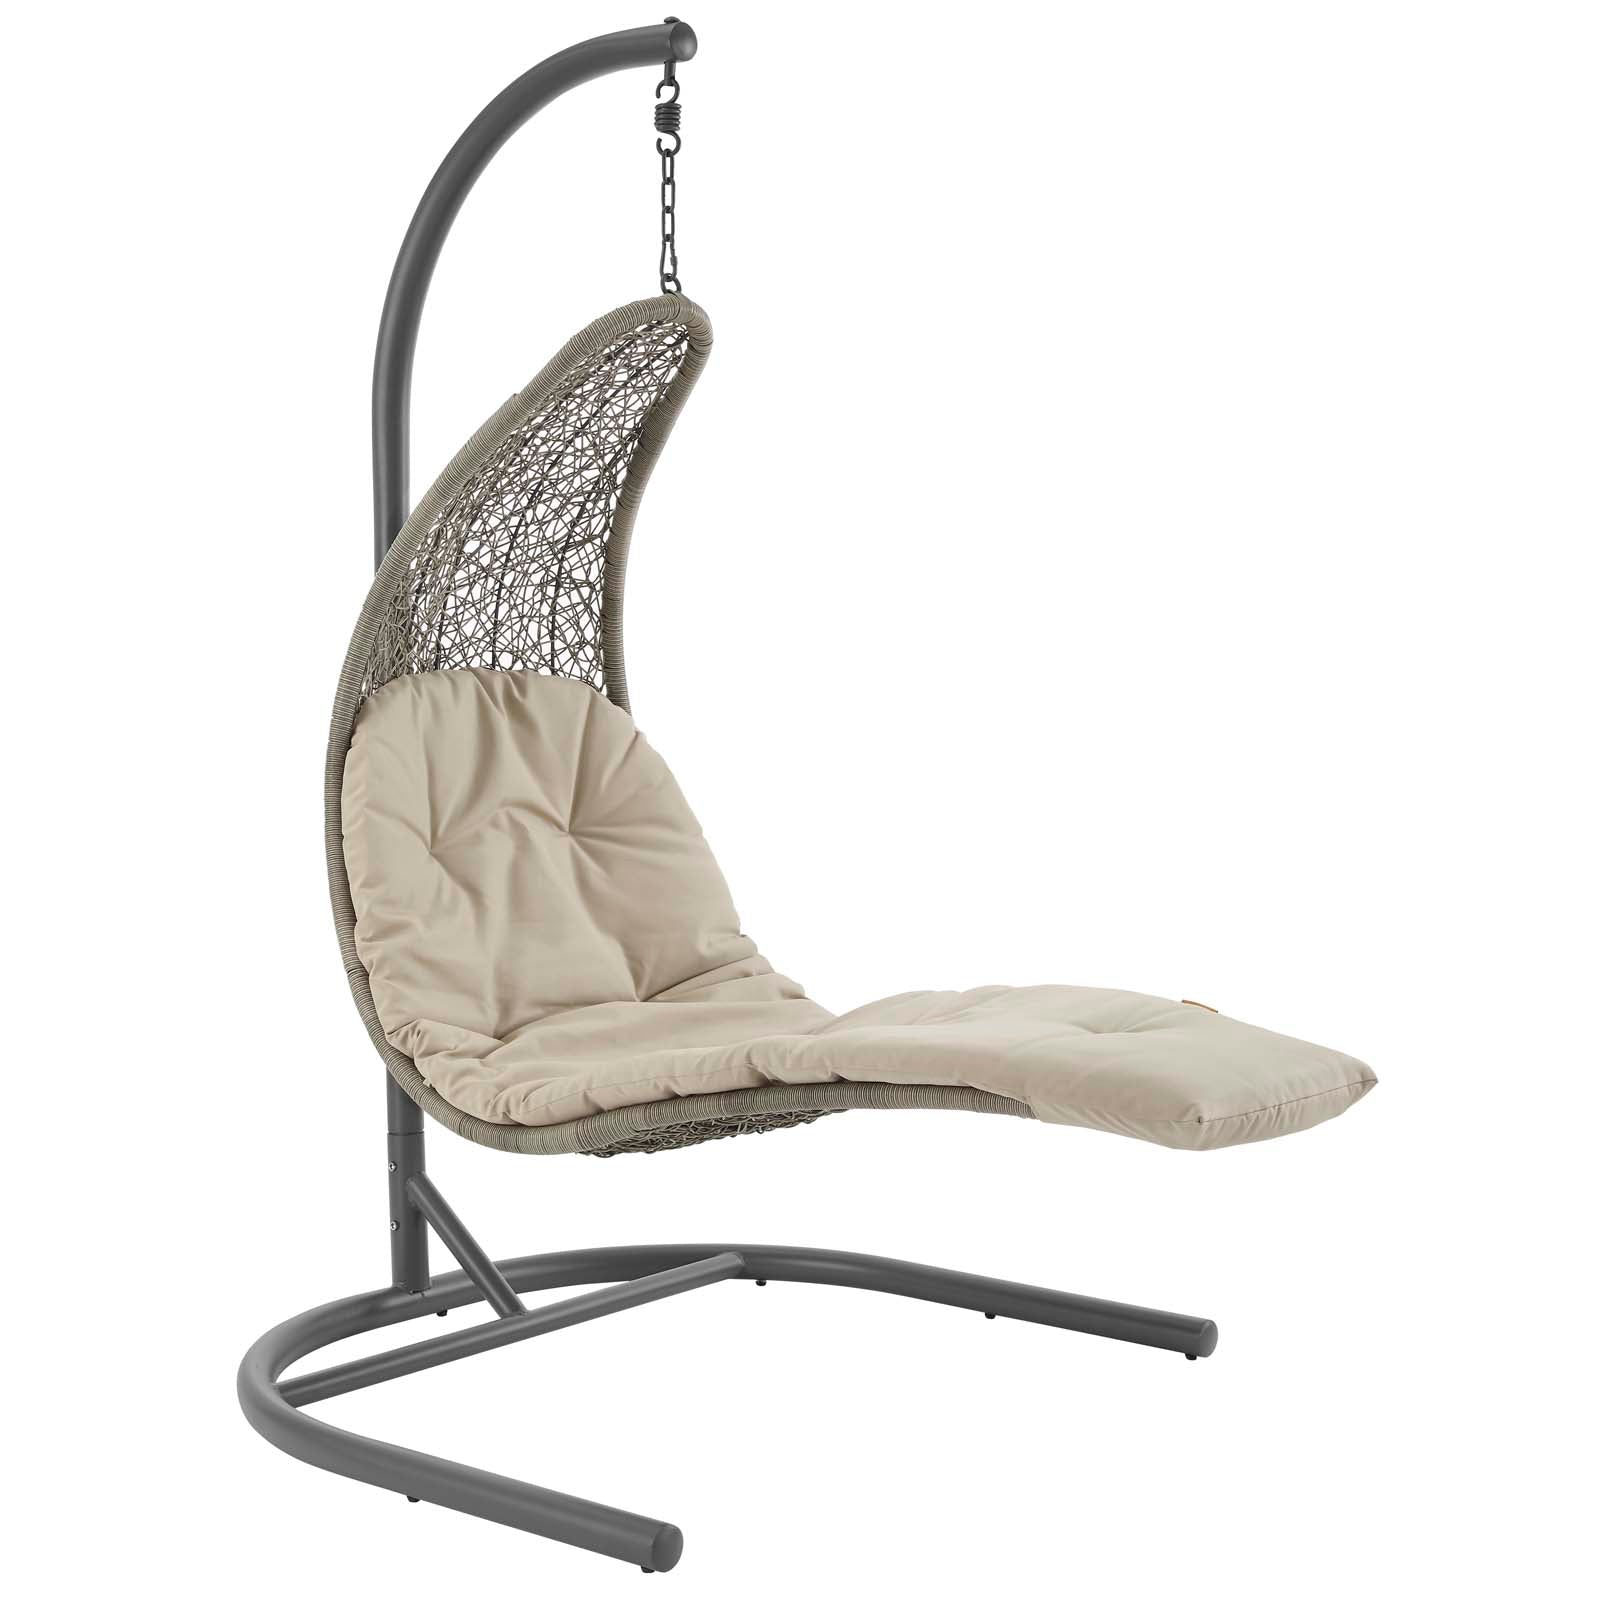 Landscape Hanging Chaise Patio Swing Chair